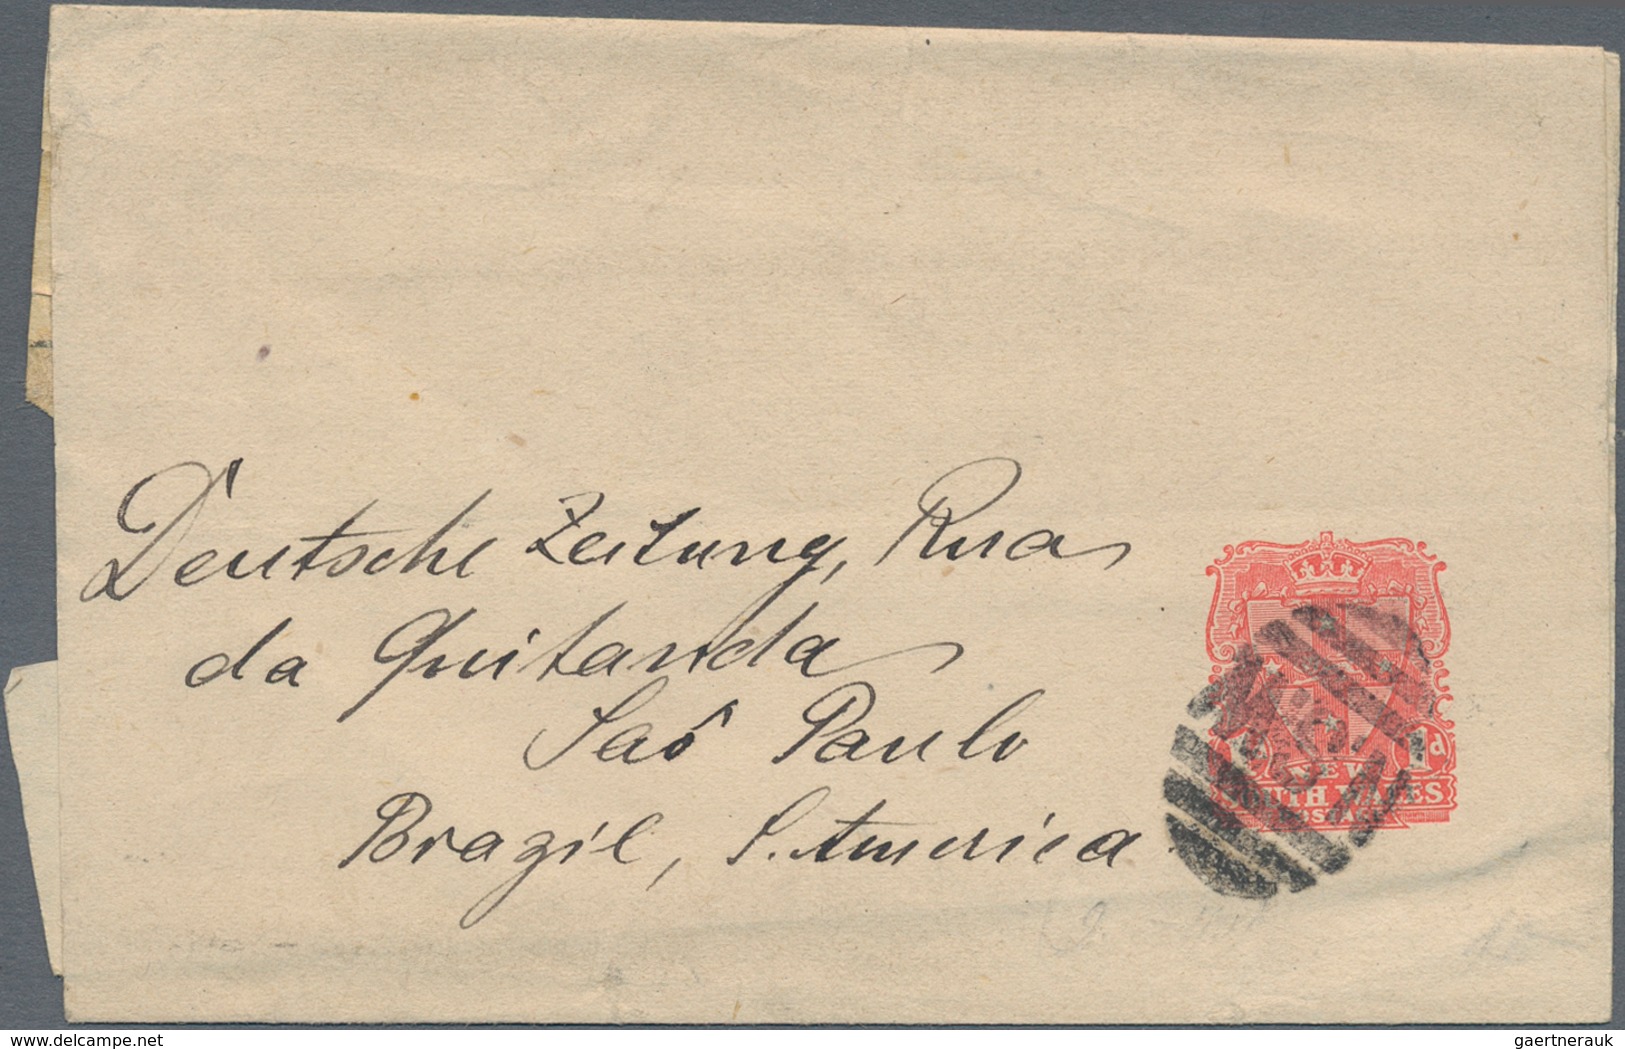 Neusüdwales: 1865/1910 (ca.), POSTAL STATIONERY: accumulation with about 220 mostly different postal